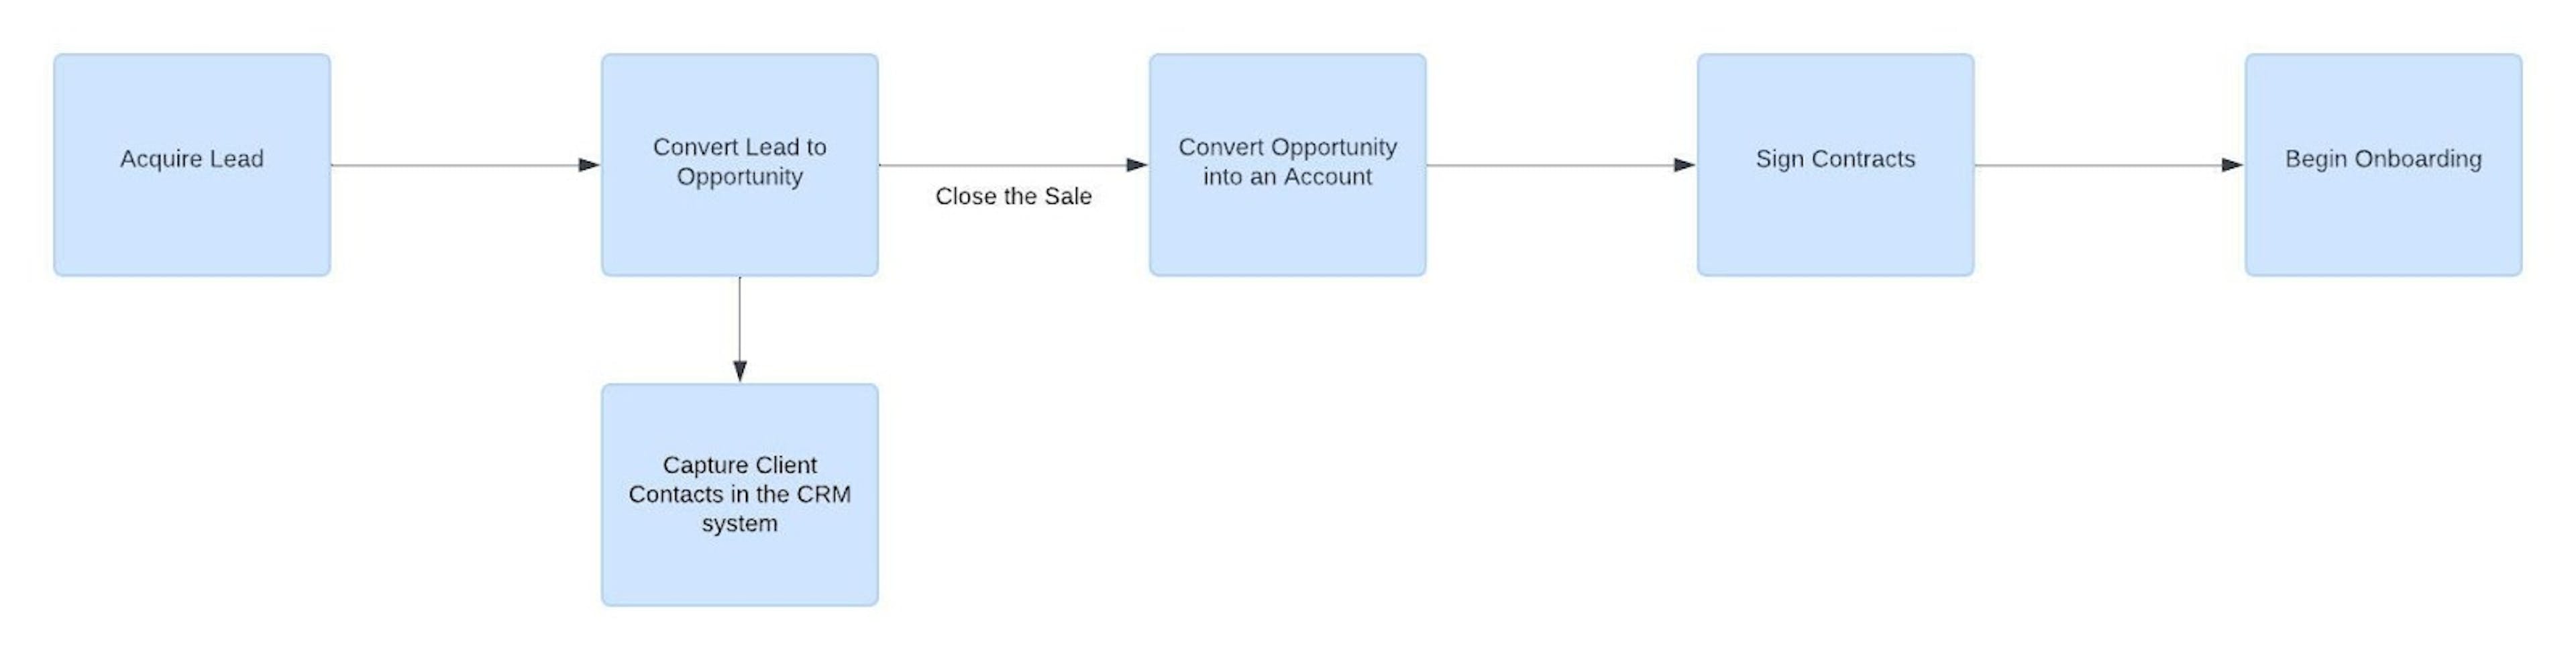 Figure 2: A Typical Sales Cycle